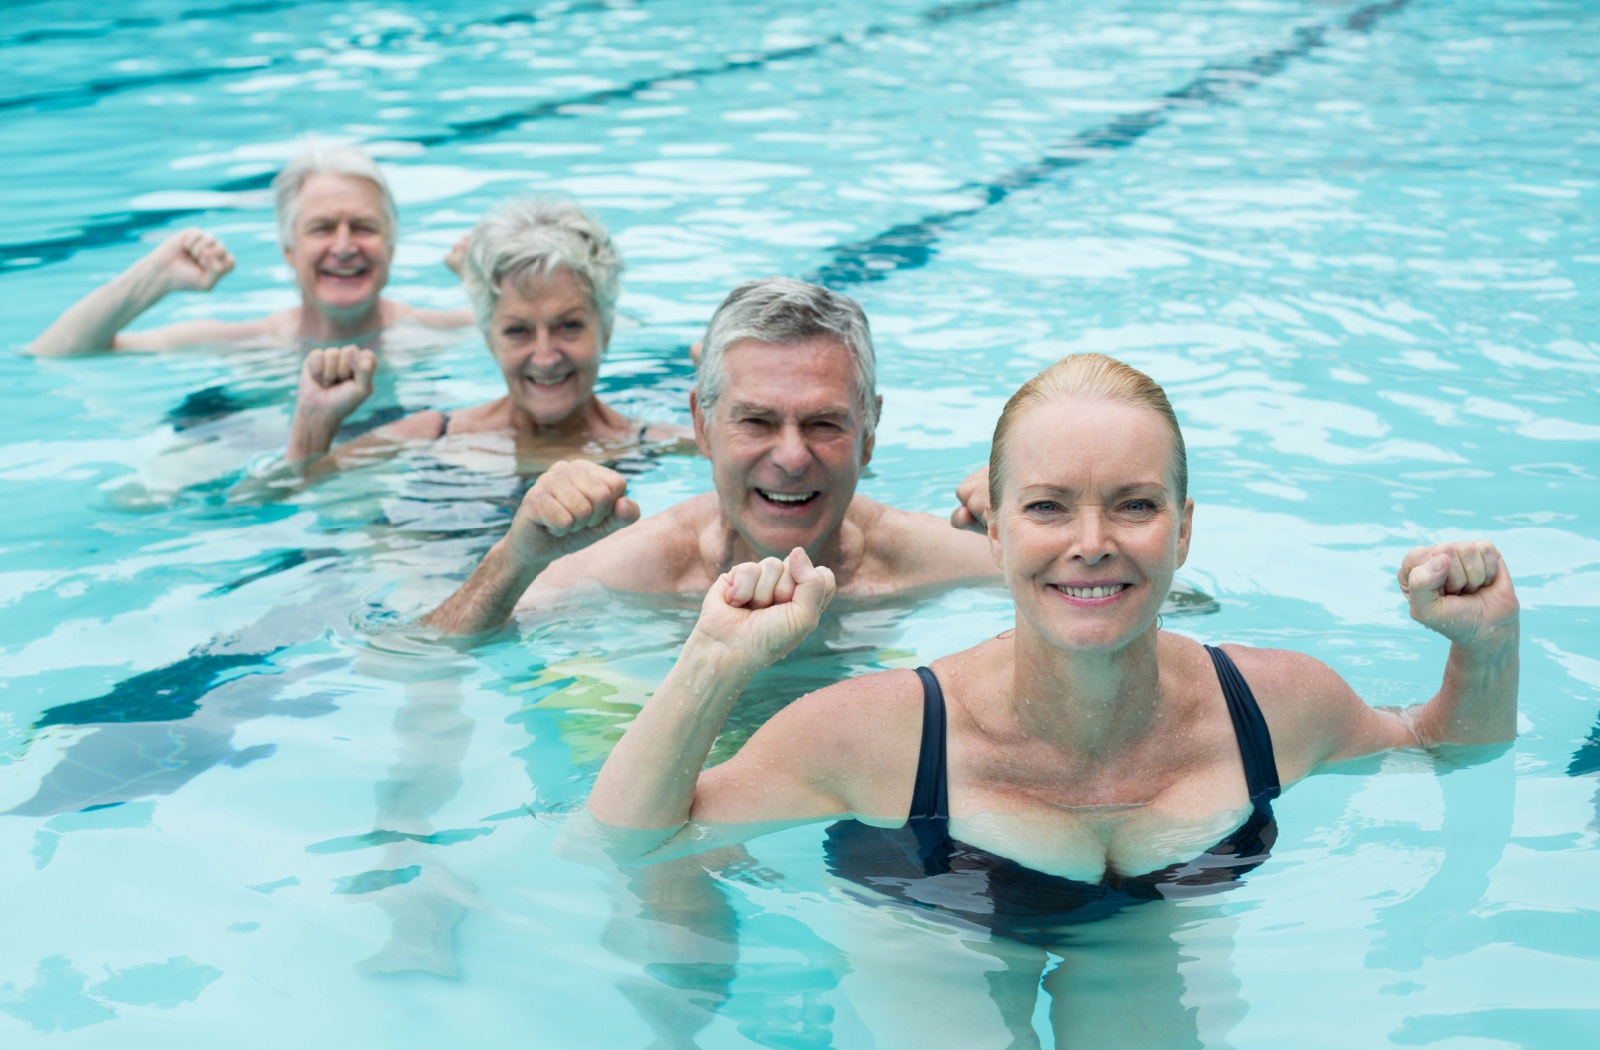 A group of older adults having fun during aquatic therapy.